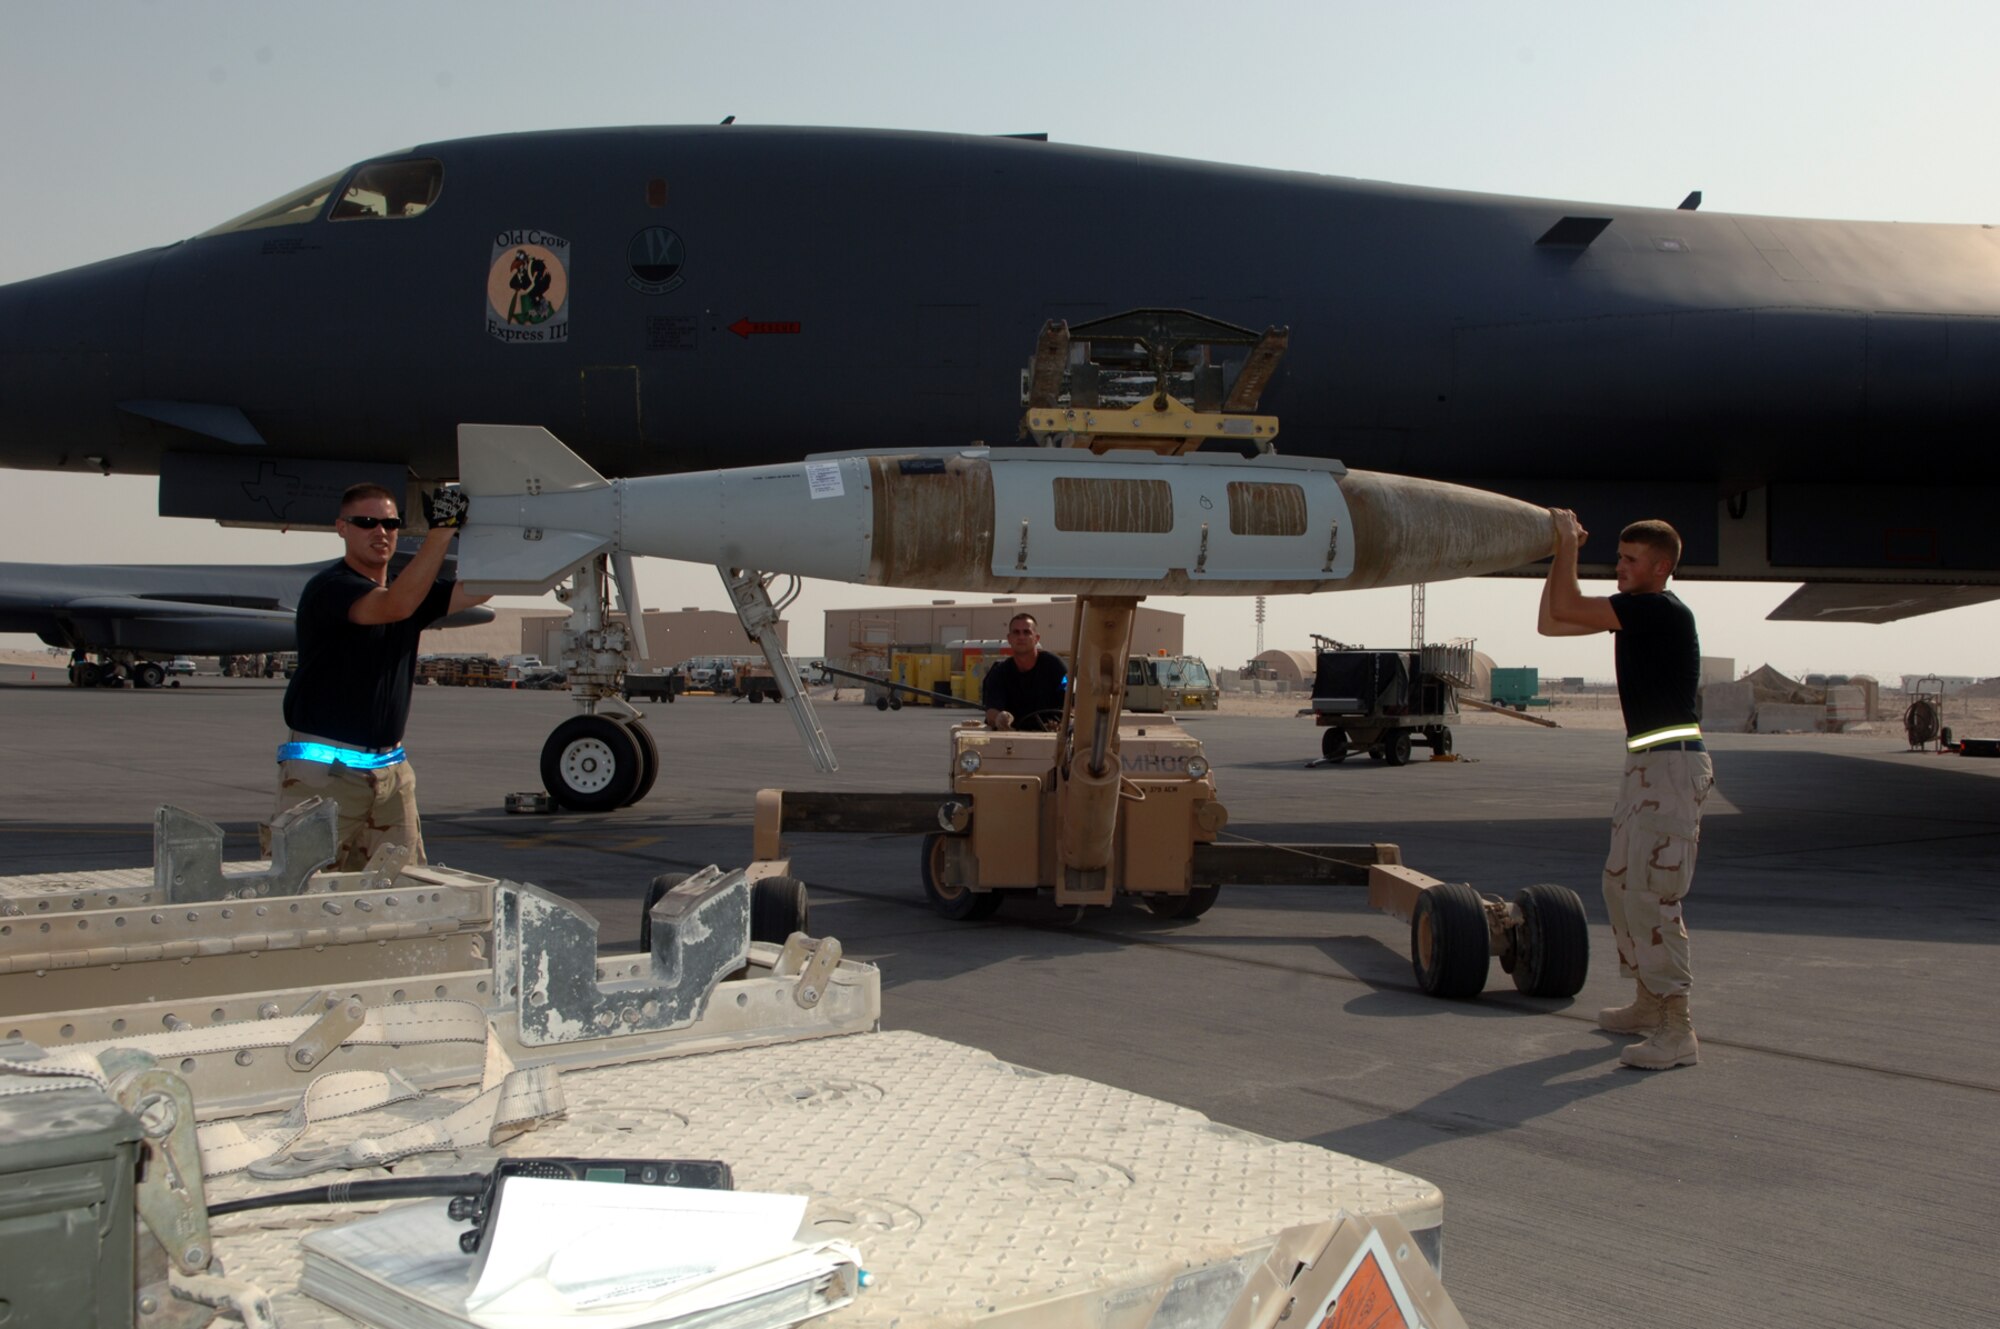 (From left) Senior Airman Jeremy Ridings, Master Sgt. Jerry Shelton, both with the 379th Expeditionary Aircraft Maintenance Squadron, and Airman 1st Class James Deason, with the 379th Expeditionary Maintenance Squadron, prepare to load a guided bomb unit-31 onto a B-1B Lancer, preparing it for a mission. The weapons flight has loaded more than 400 tons of munitions onto B-1s since July 24. (U.S. Air Force photo by Master Sgt. Ken Stephens)